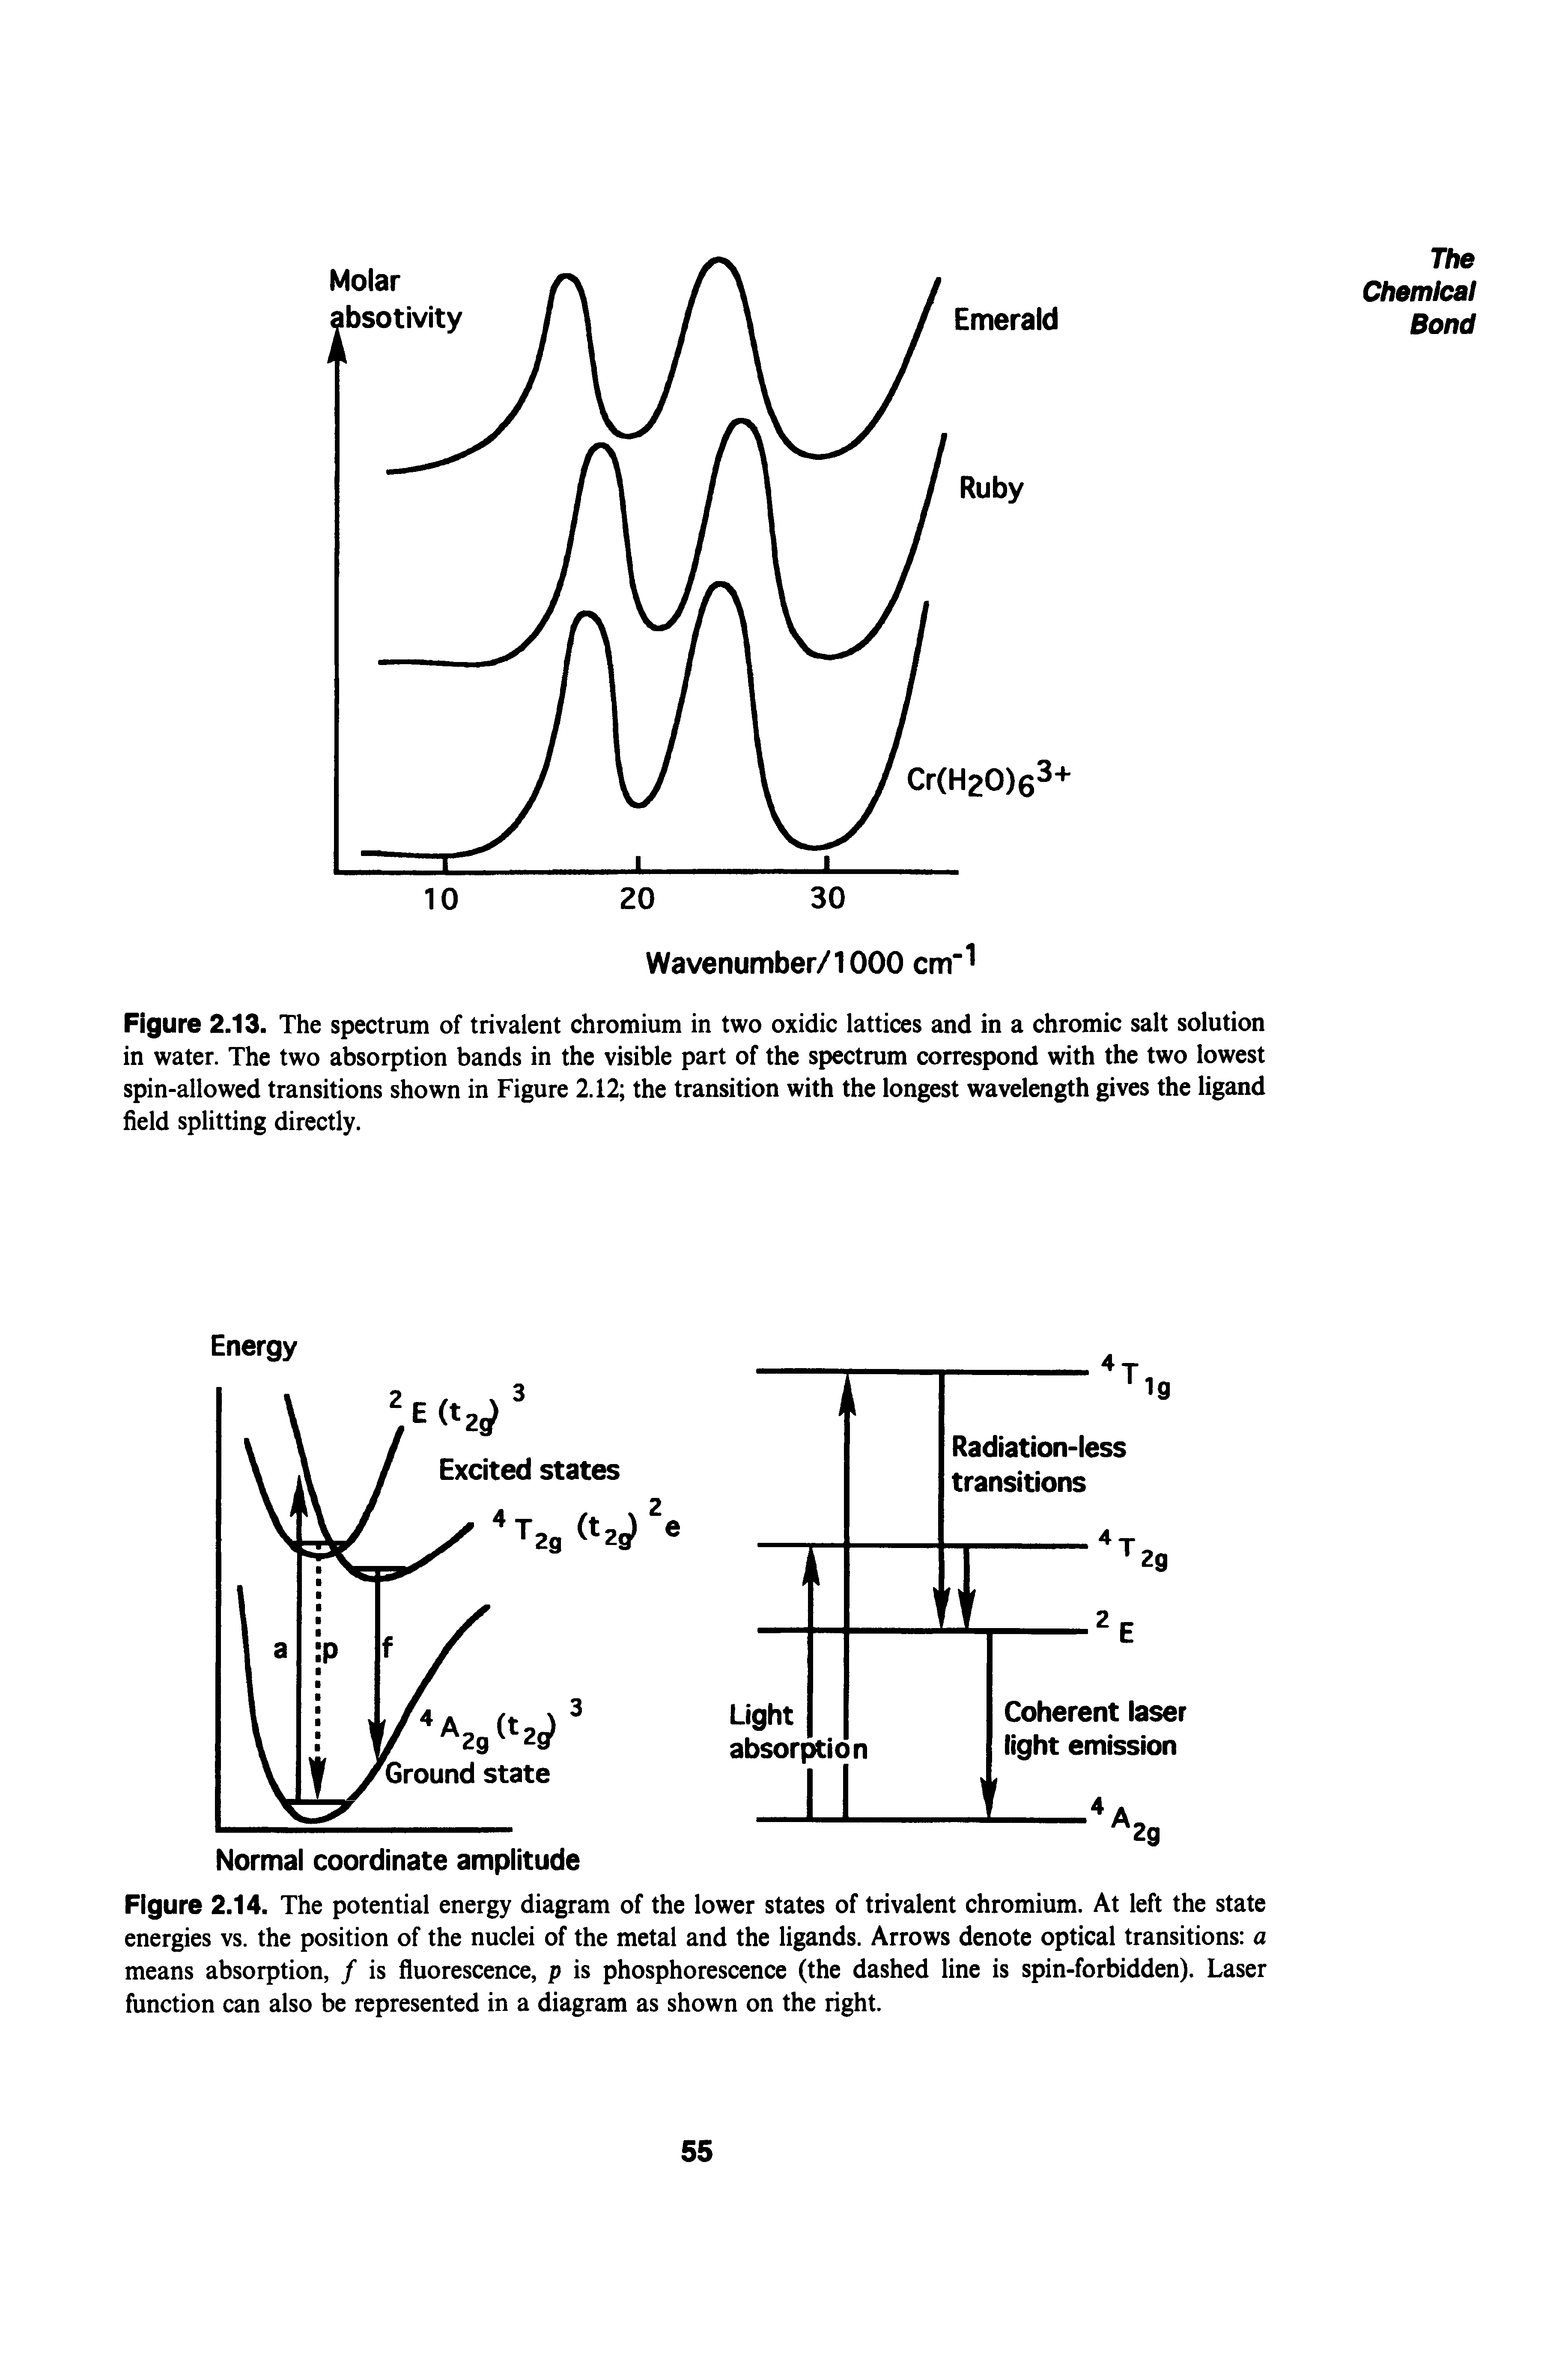 Figure 2.14. The potential energy diagram of the lower states of trivalent chromium. At left the state energies vs. the position of the nuclei of the metal and the ligands. Arrows denote optical transitions a means absorption, / is fluorescence, p is phosphorescence (the dashed line is spin-forbidden). Laser function can also be represented in a diagram as shown on the right.